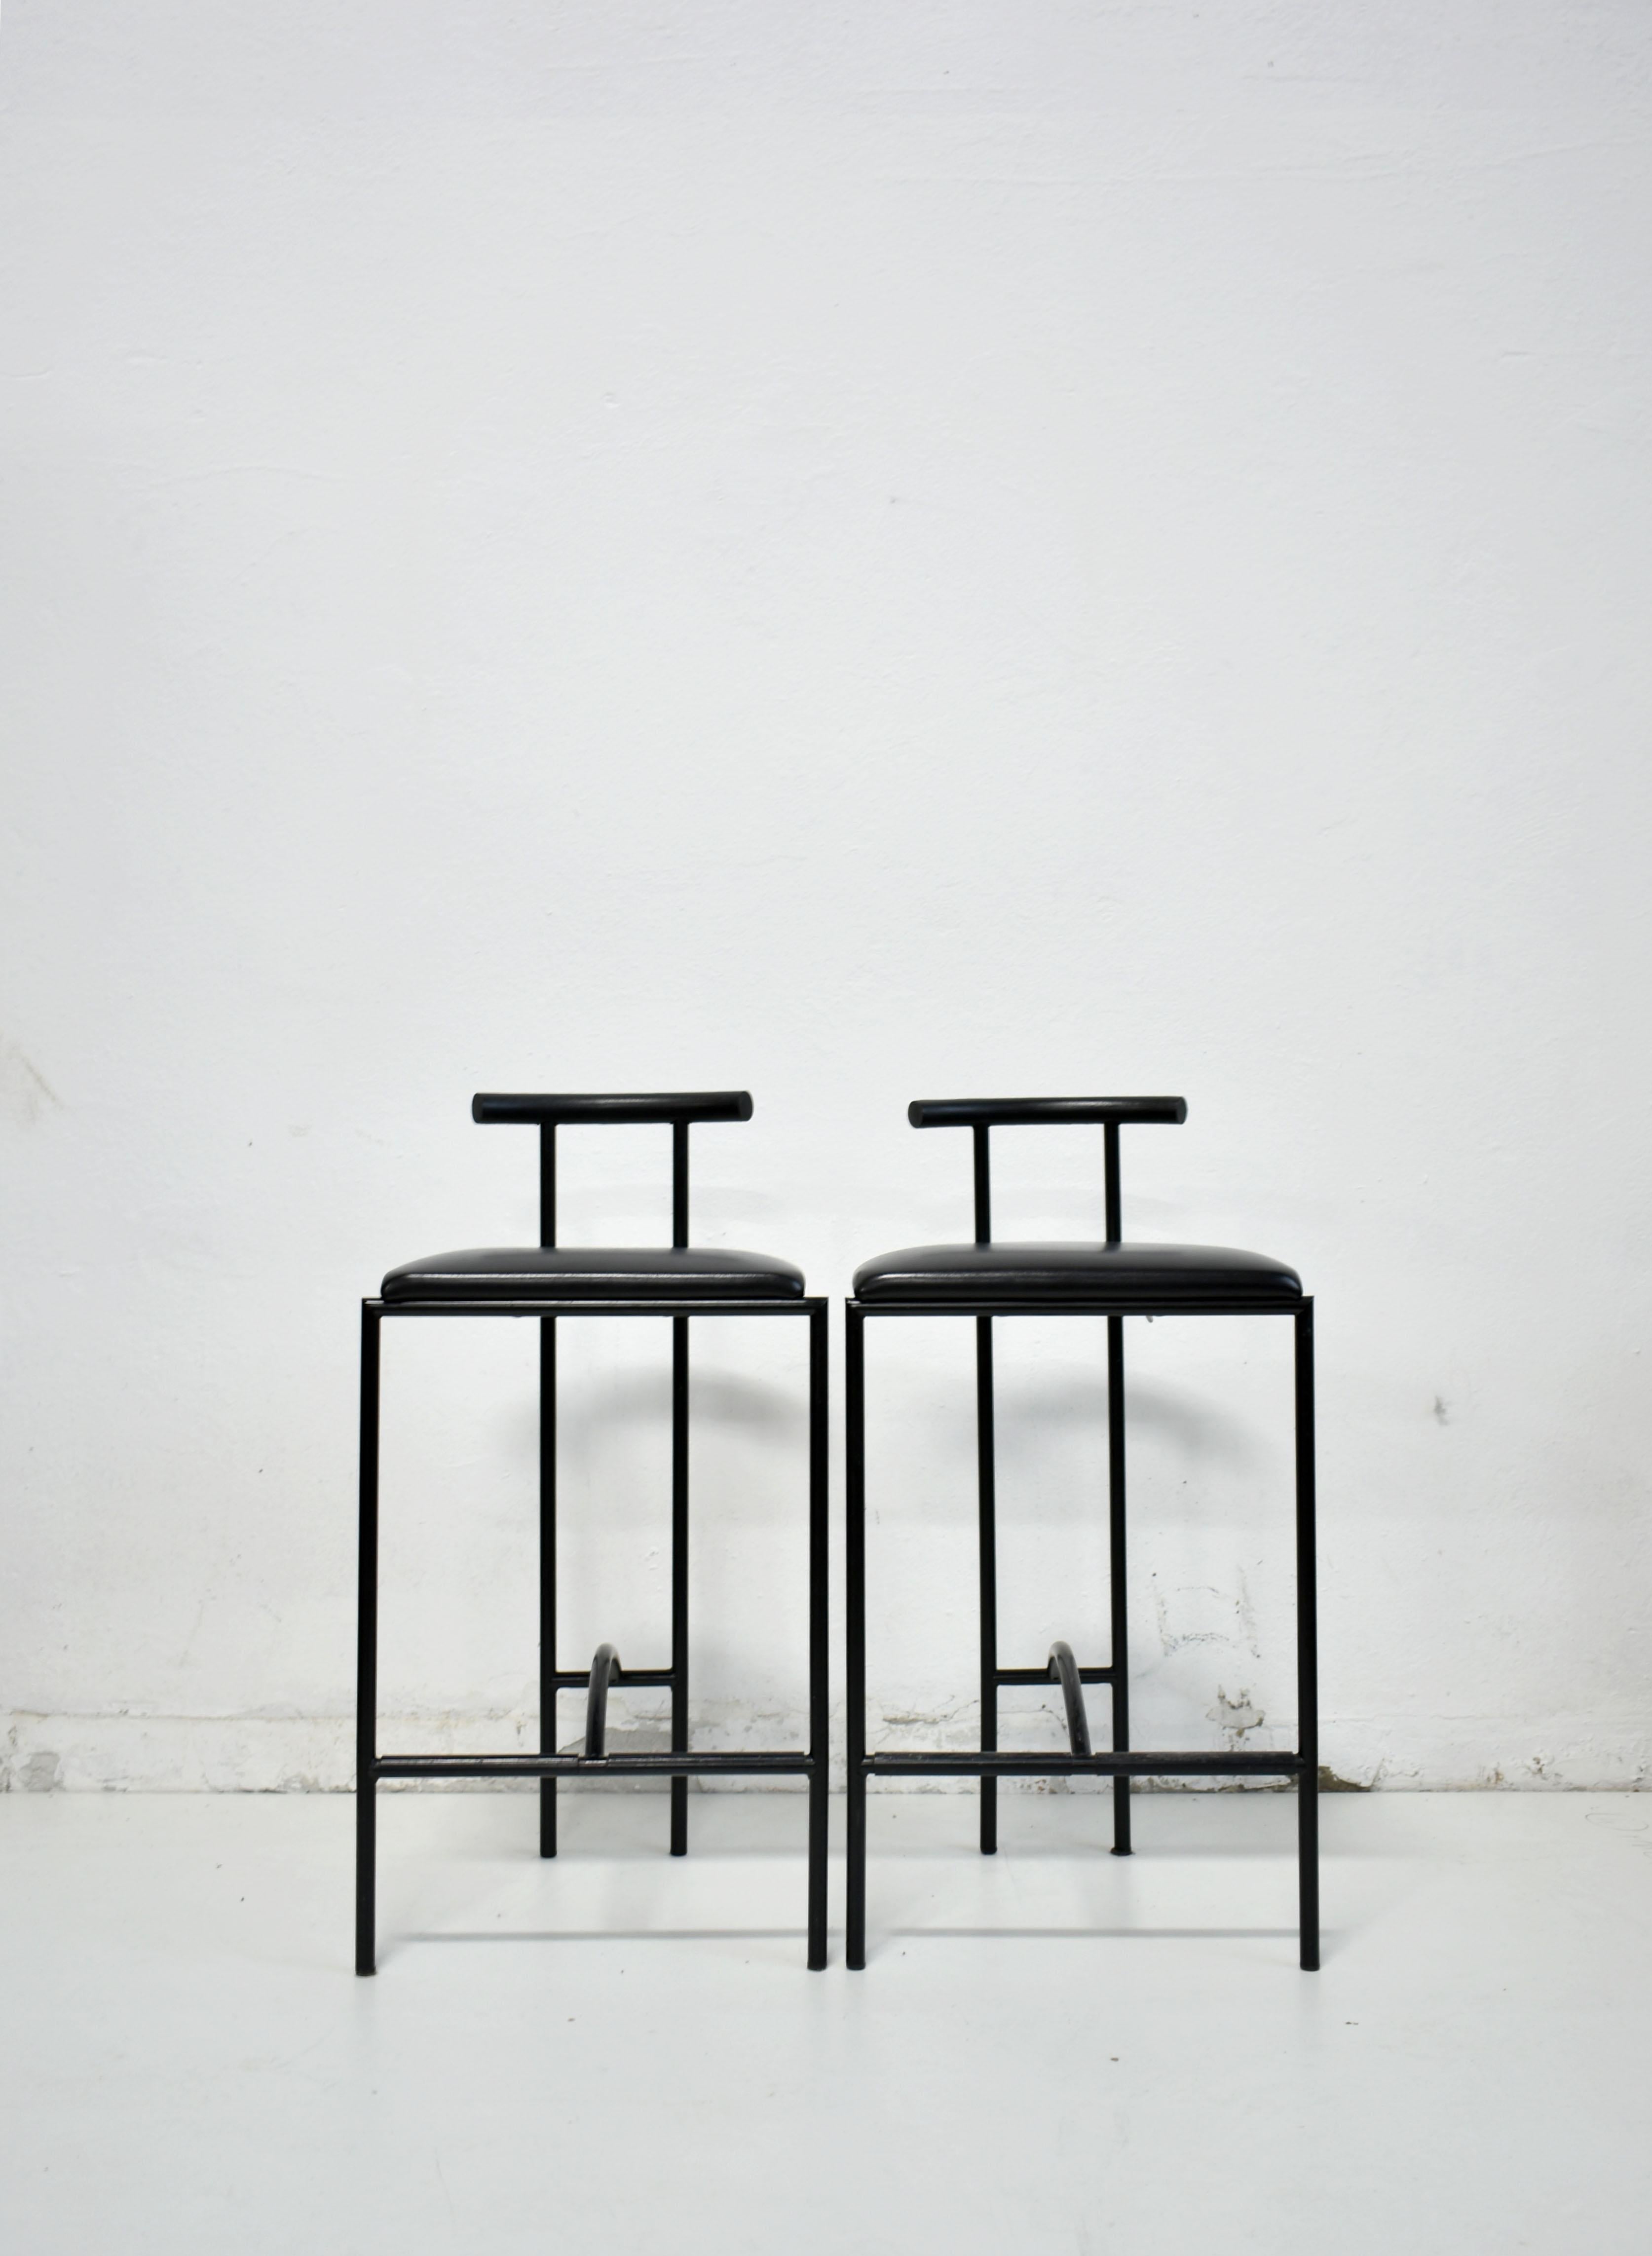 Famous design from the 1980s, Tokyo bar stools by Rodney Kinsman, produced by Bieffeplast, Italy. The stools were originally designed for London’s Groucho club.

Stools have a Minimalist black powder-coated tubular steel frame with a black vinyl